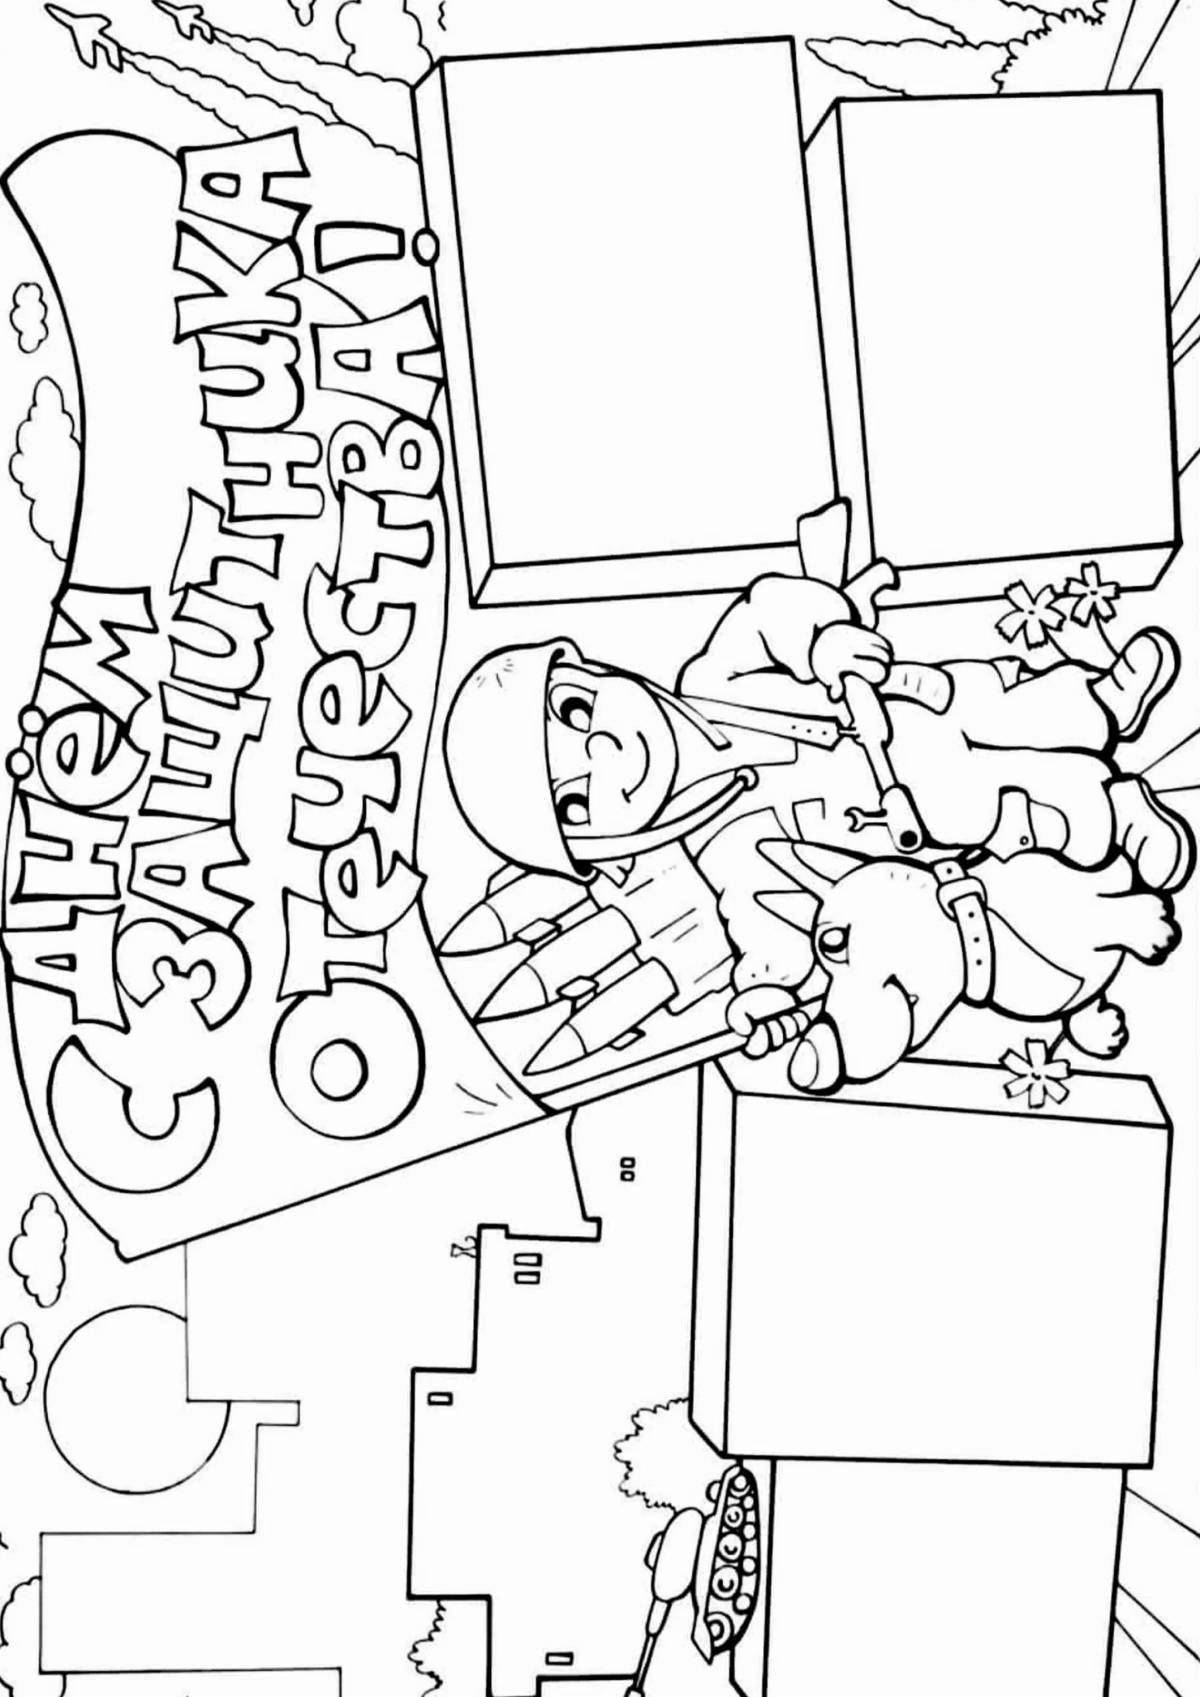 Coloring page charming wall newspaper